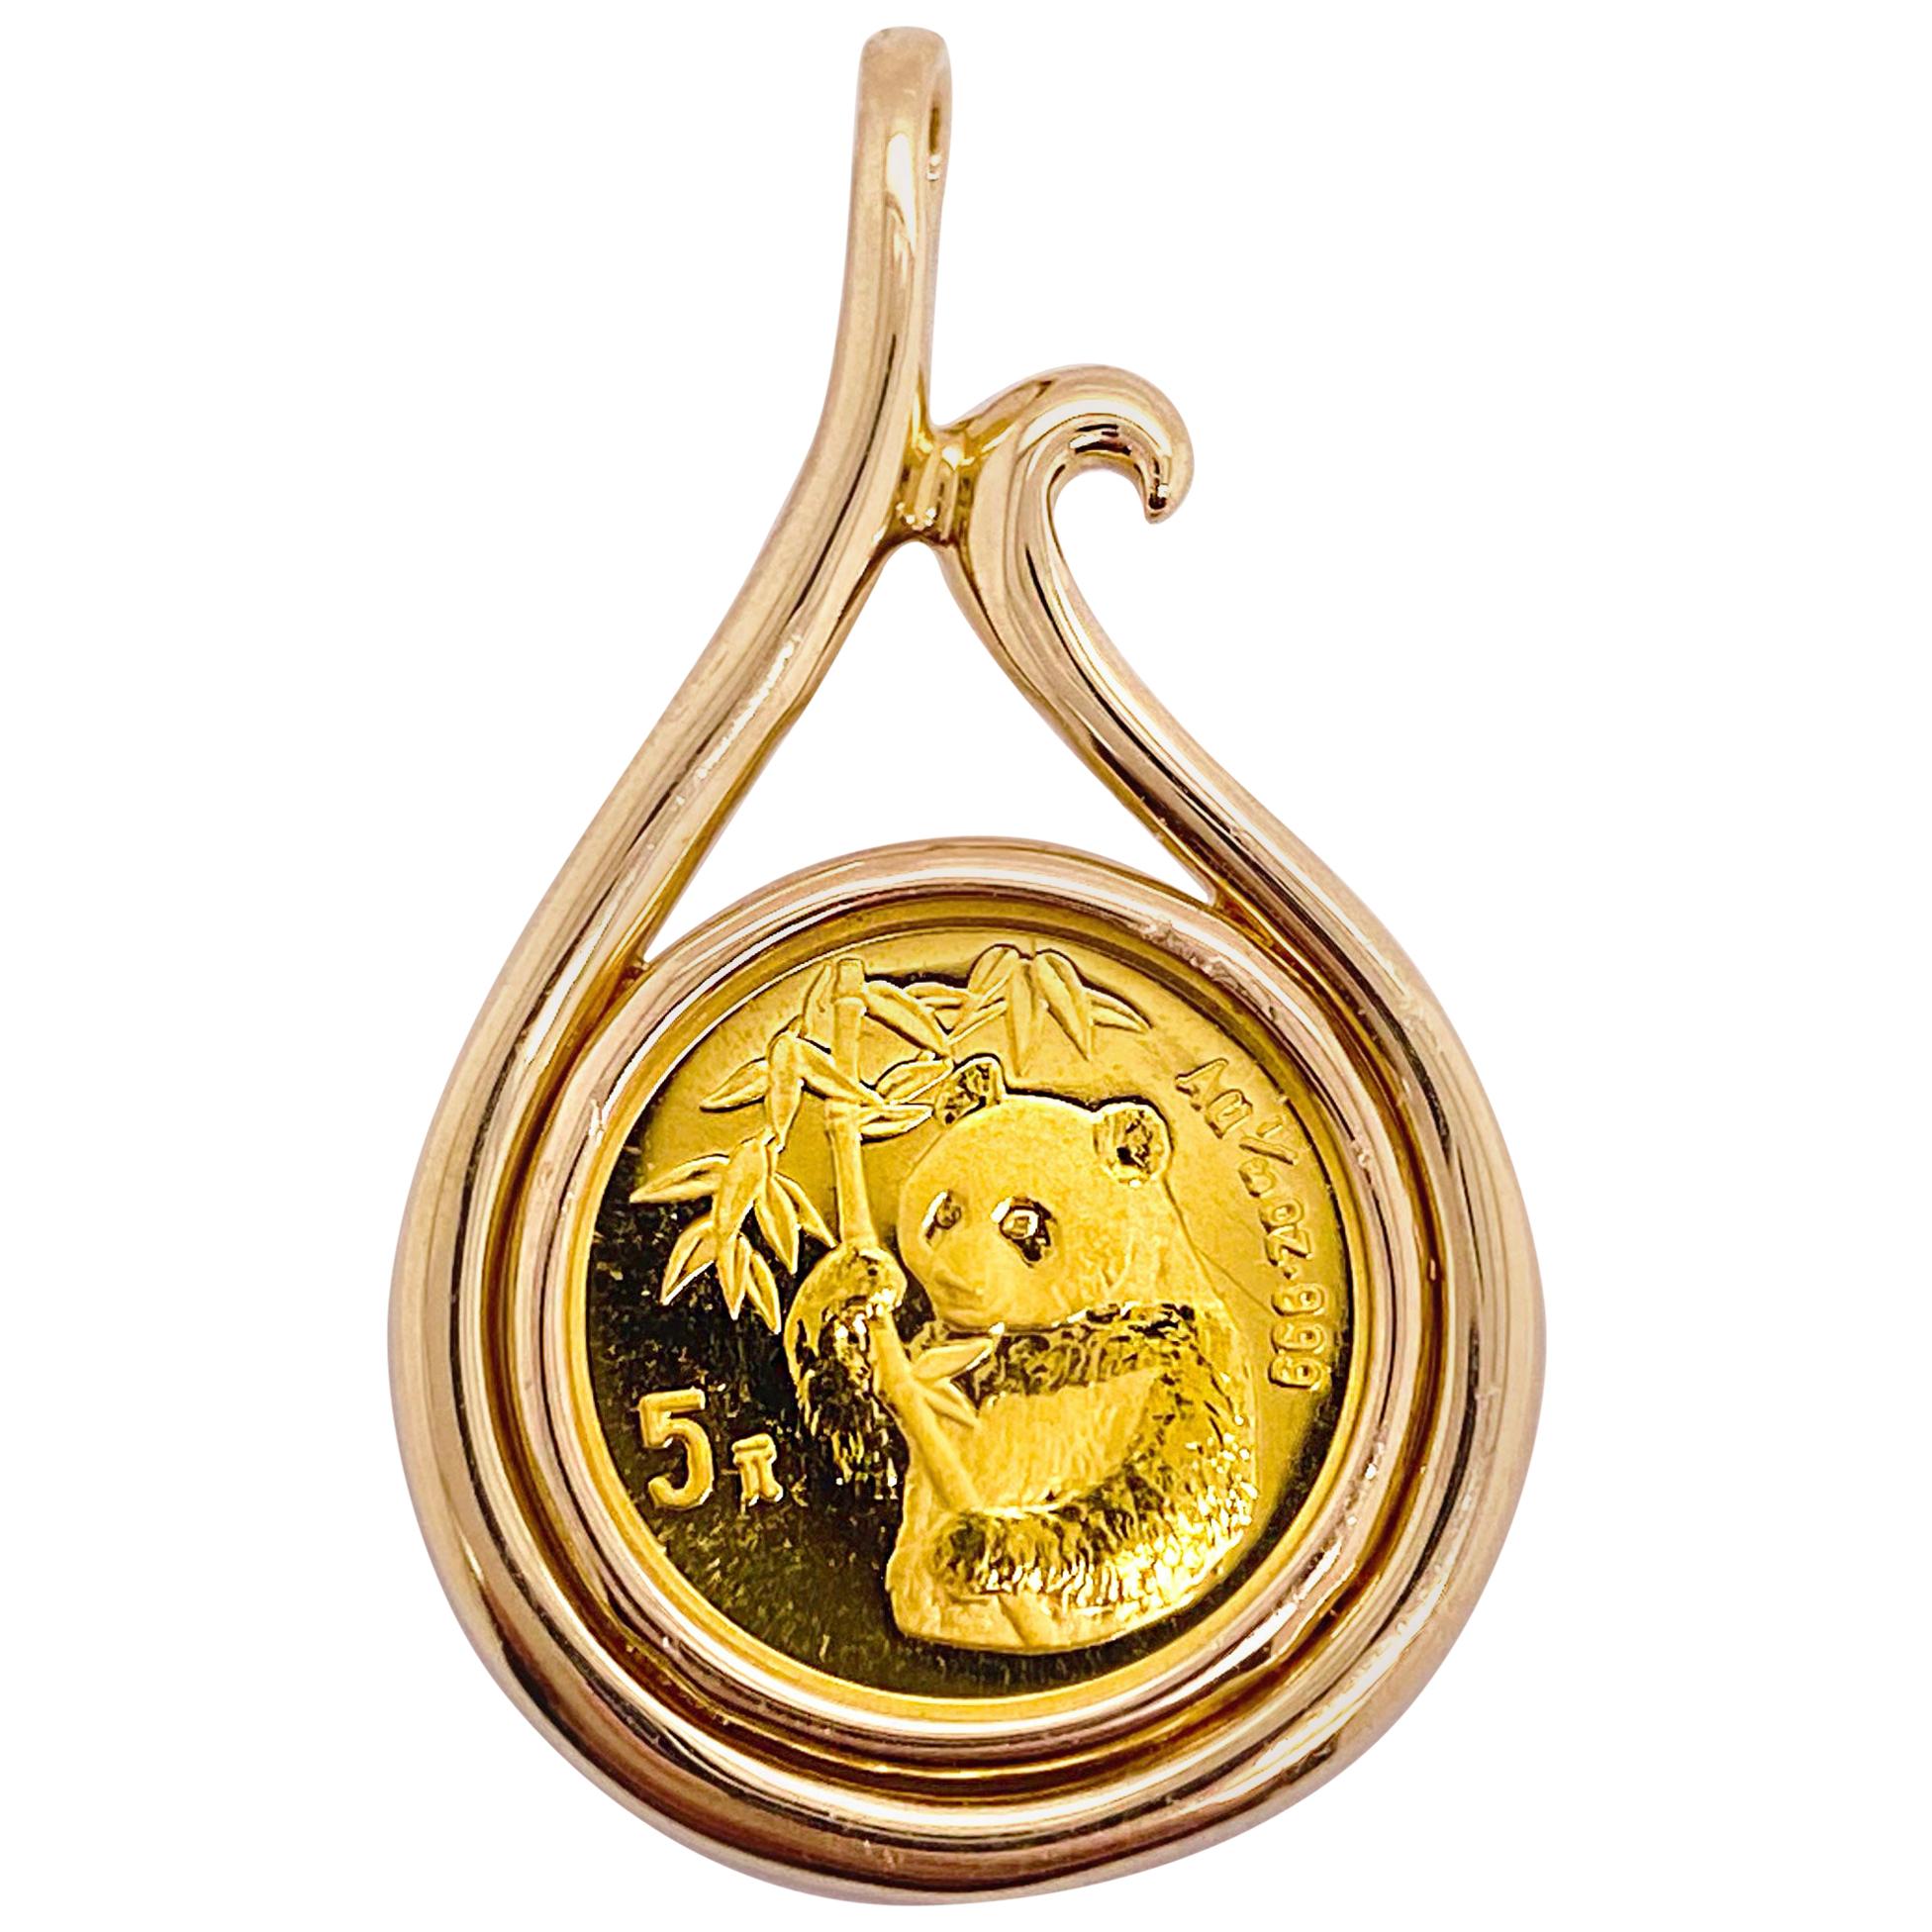 1995 Panda Coin Gold Pendant, 24K Gold, 1/20th oz Gold Panda Coin for Investment